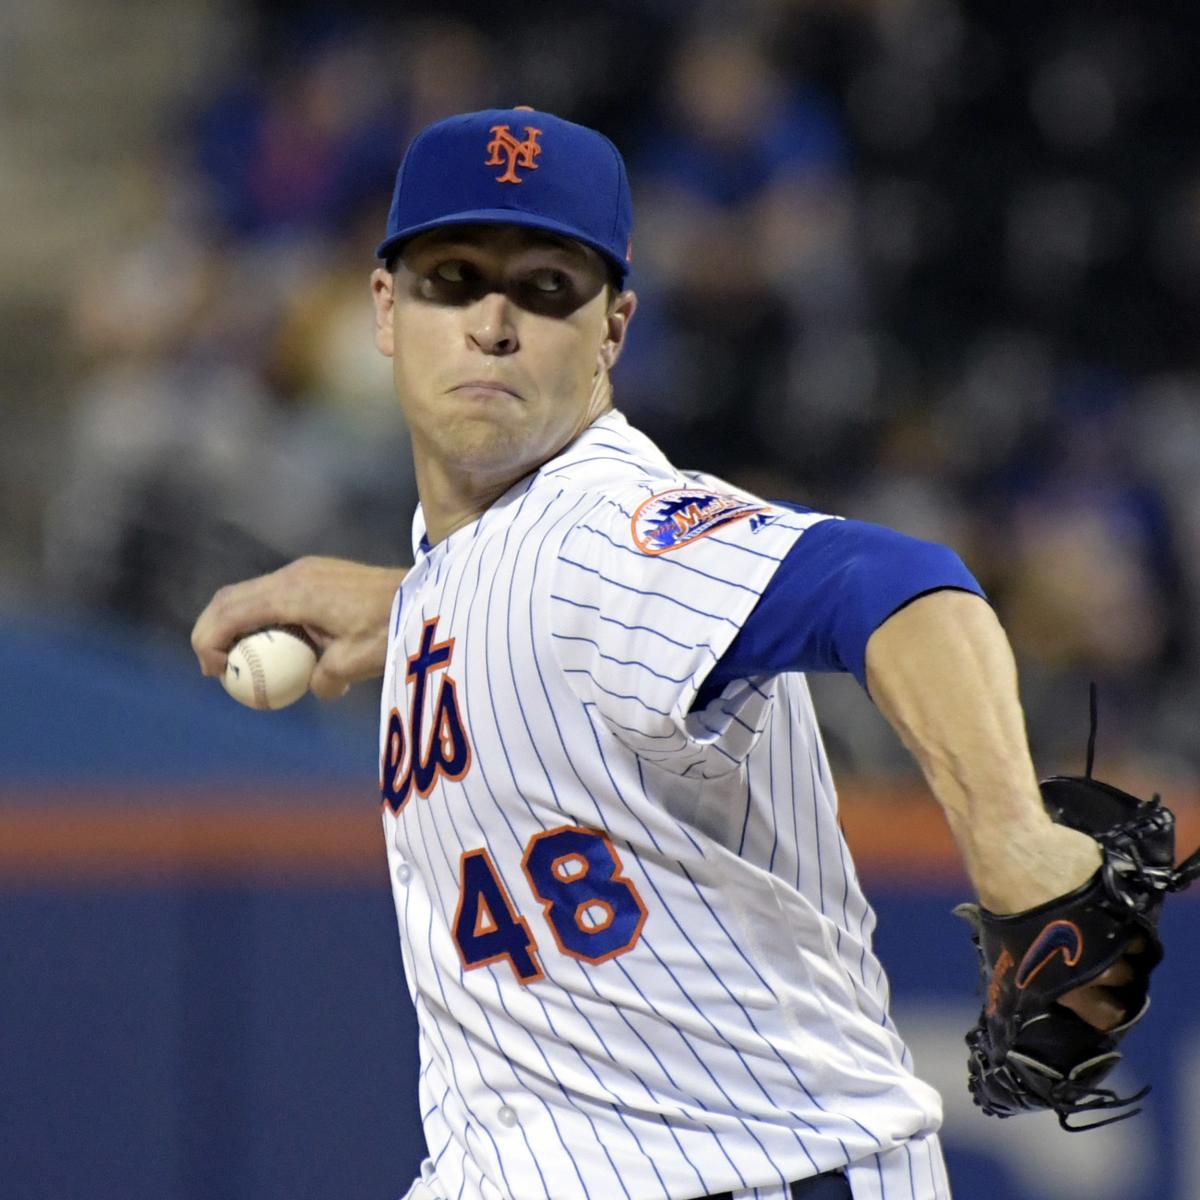 Jacob deGrom continues Cy Young push for Mets